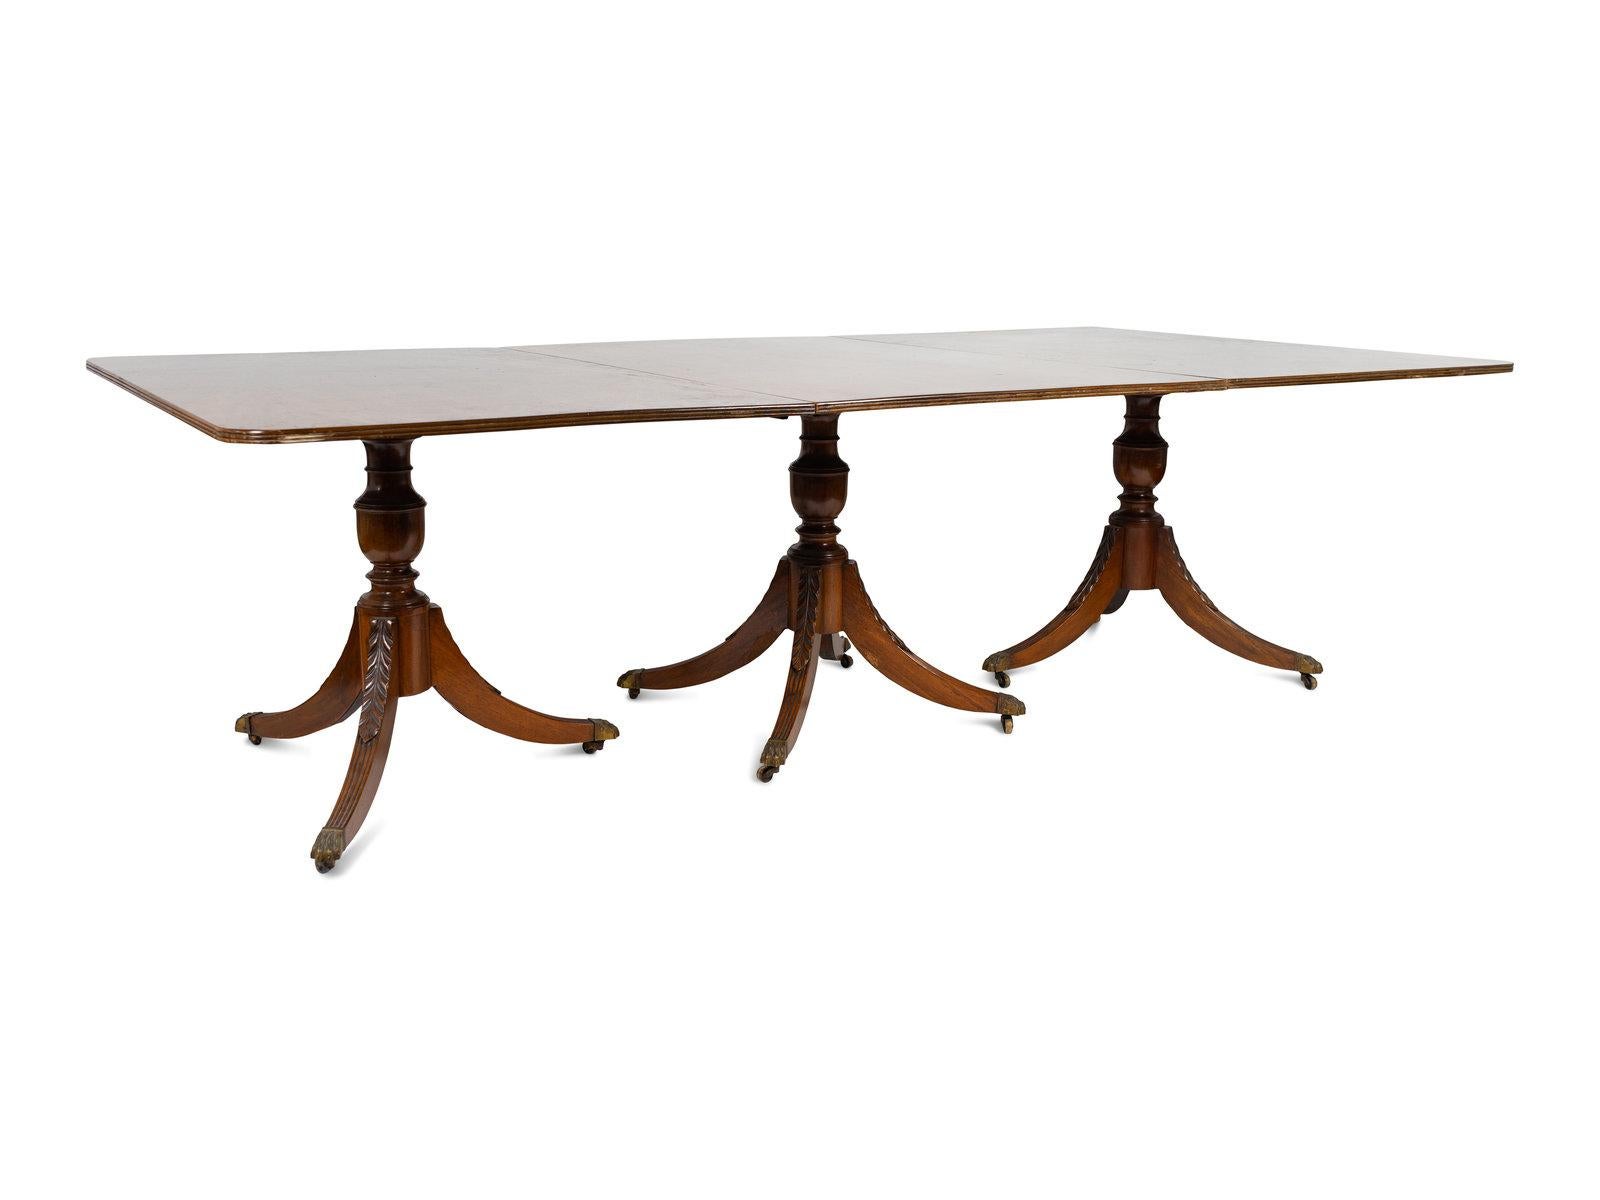 English Regency Style Mahogany Three Pedestal Dining Table, Early 20th Century For Sale